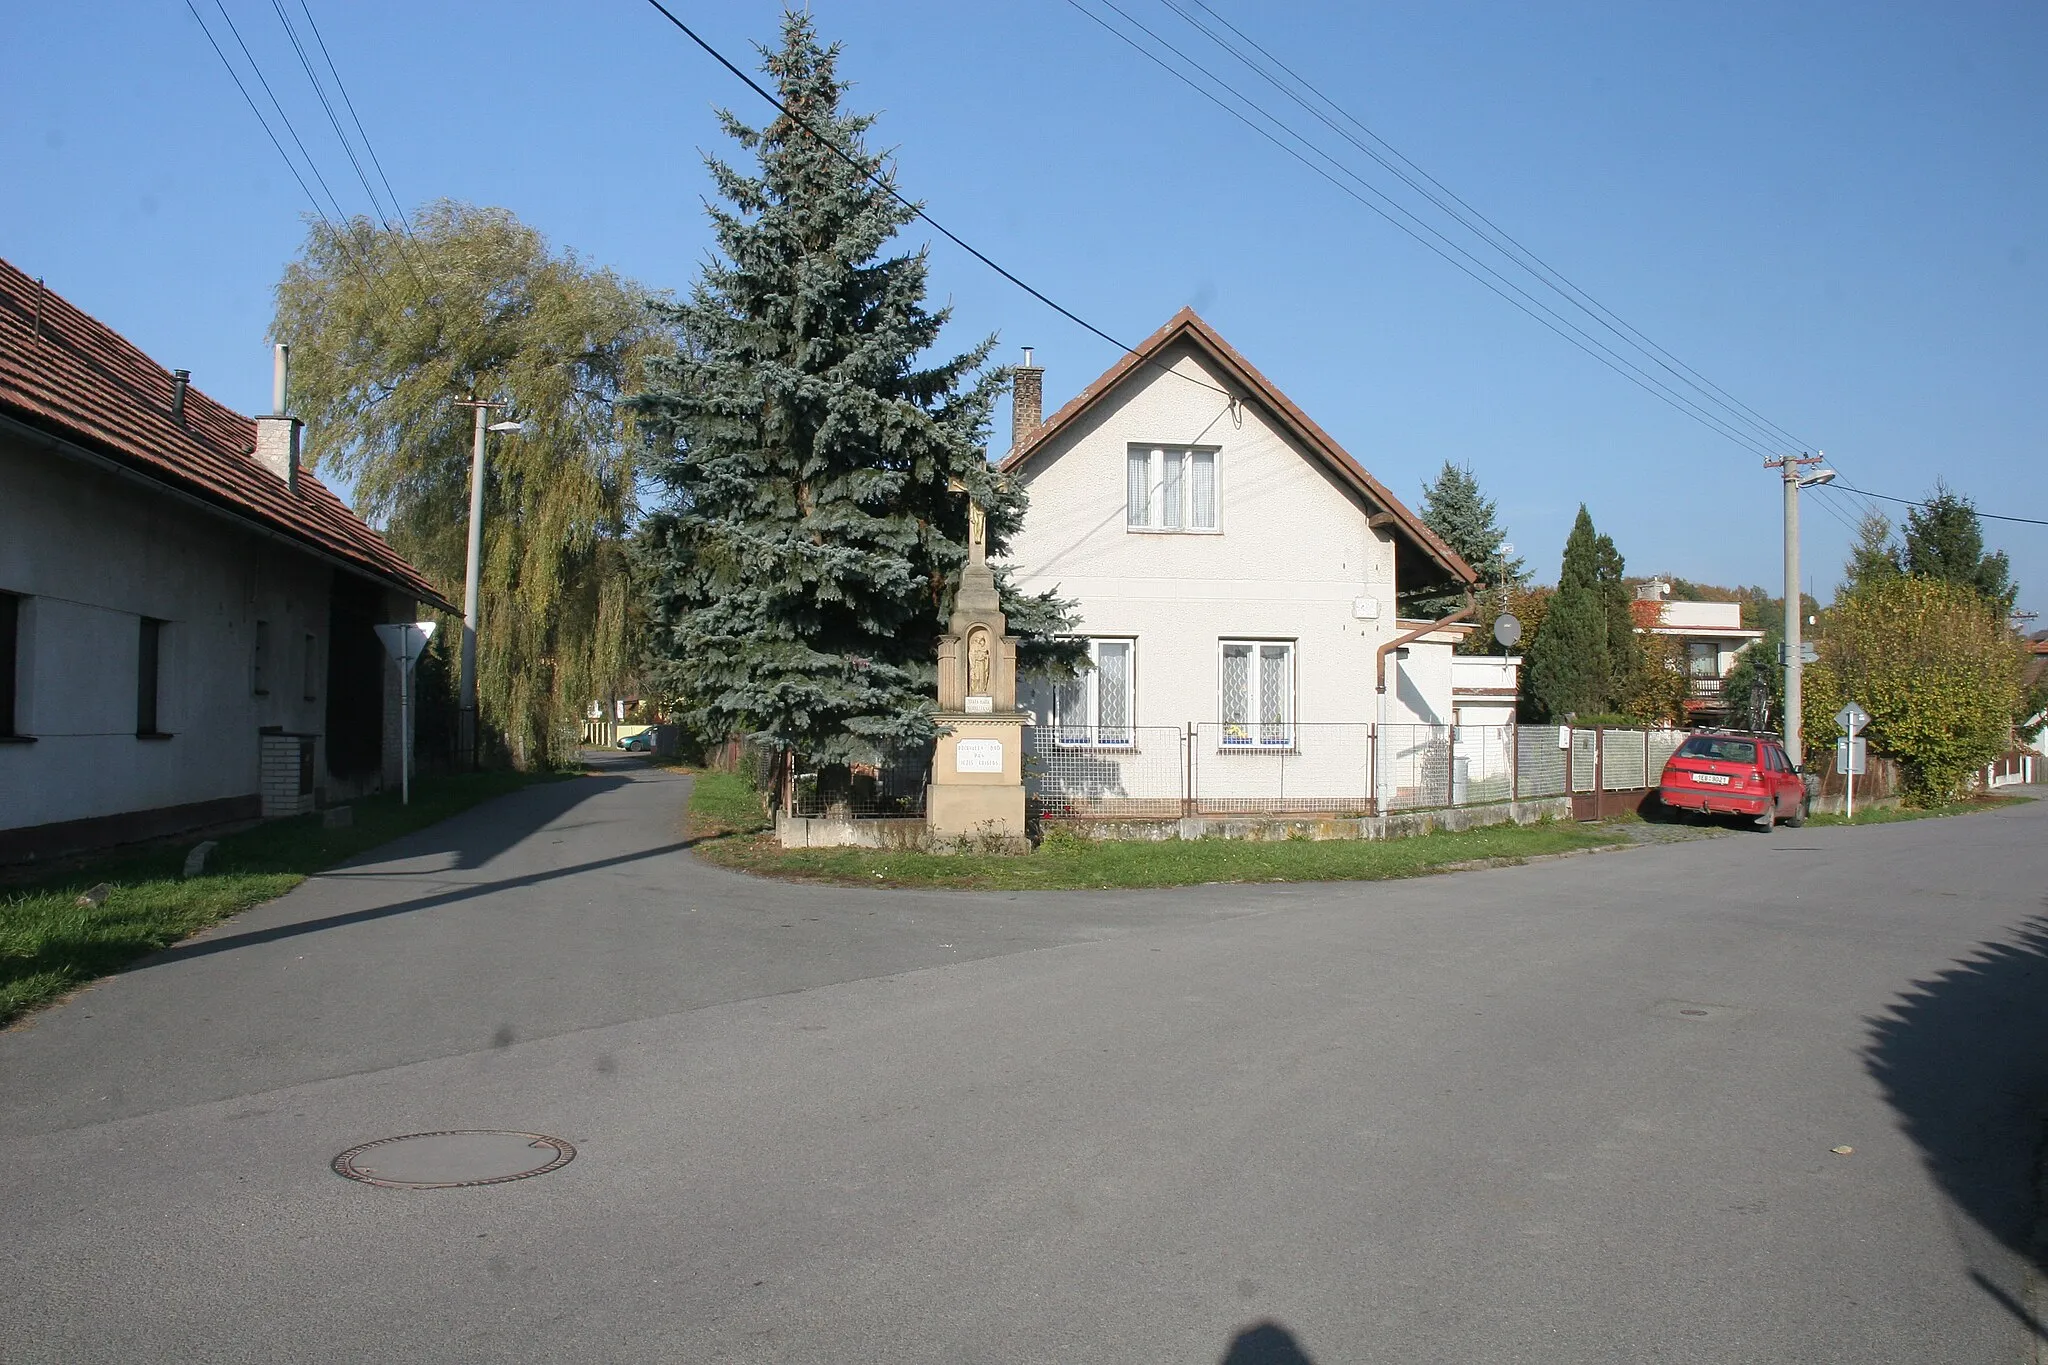 Photo showing: Podlesí kříž
Camera location 50° 05′ 03.51″ N, 15° 58′ 56.79″ E View this and other nearby images on: OpenStreetMap 50.084308;   15.982441

This file was created as a part of the photographic program of Wikimedia Czech Republic. Project: Foto českých obcí The program supports Wikimedia Commons photographers in the Czech Republic.